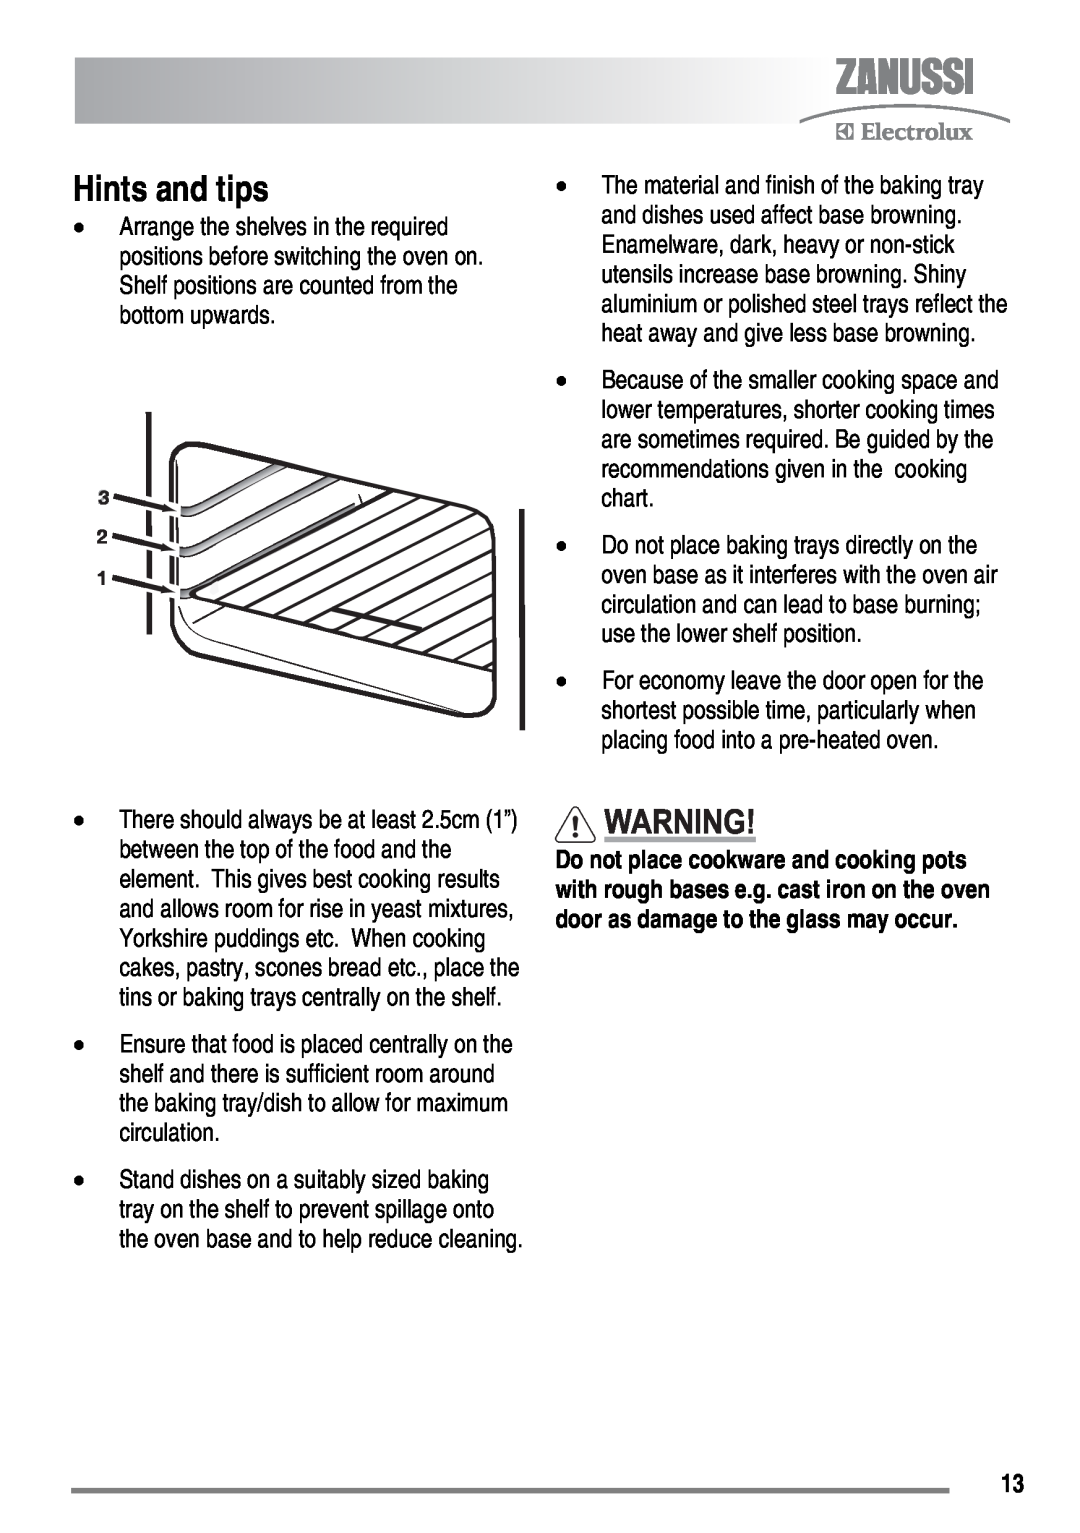 Zanussi ZKC6010 user manual Hints and tips 